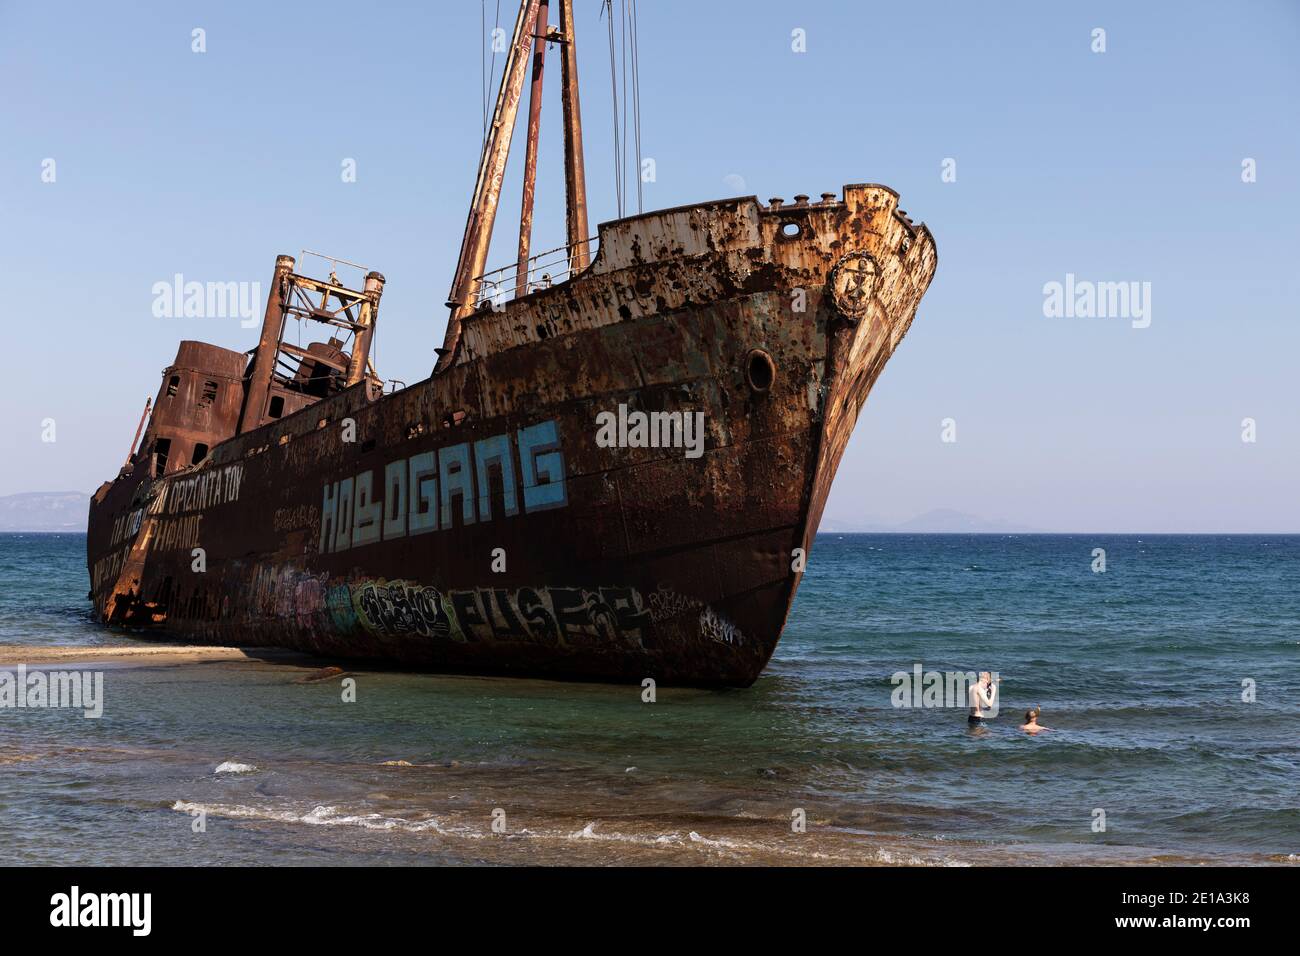 Tourists diving next to the shipwreck 'Dimitrios' in Gytheio, Peloponnese region, Greece on July 29, 2020. Stock Photo